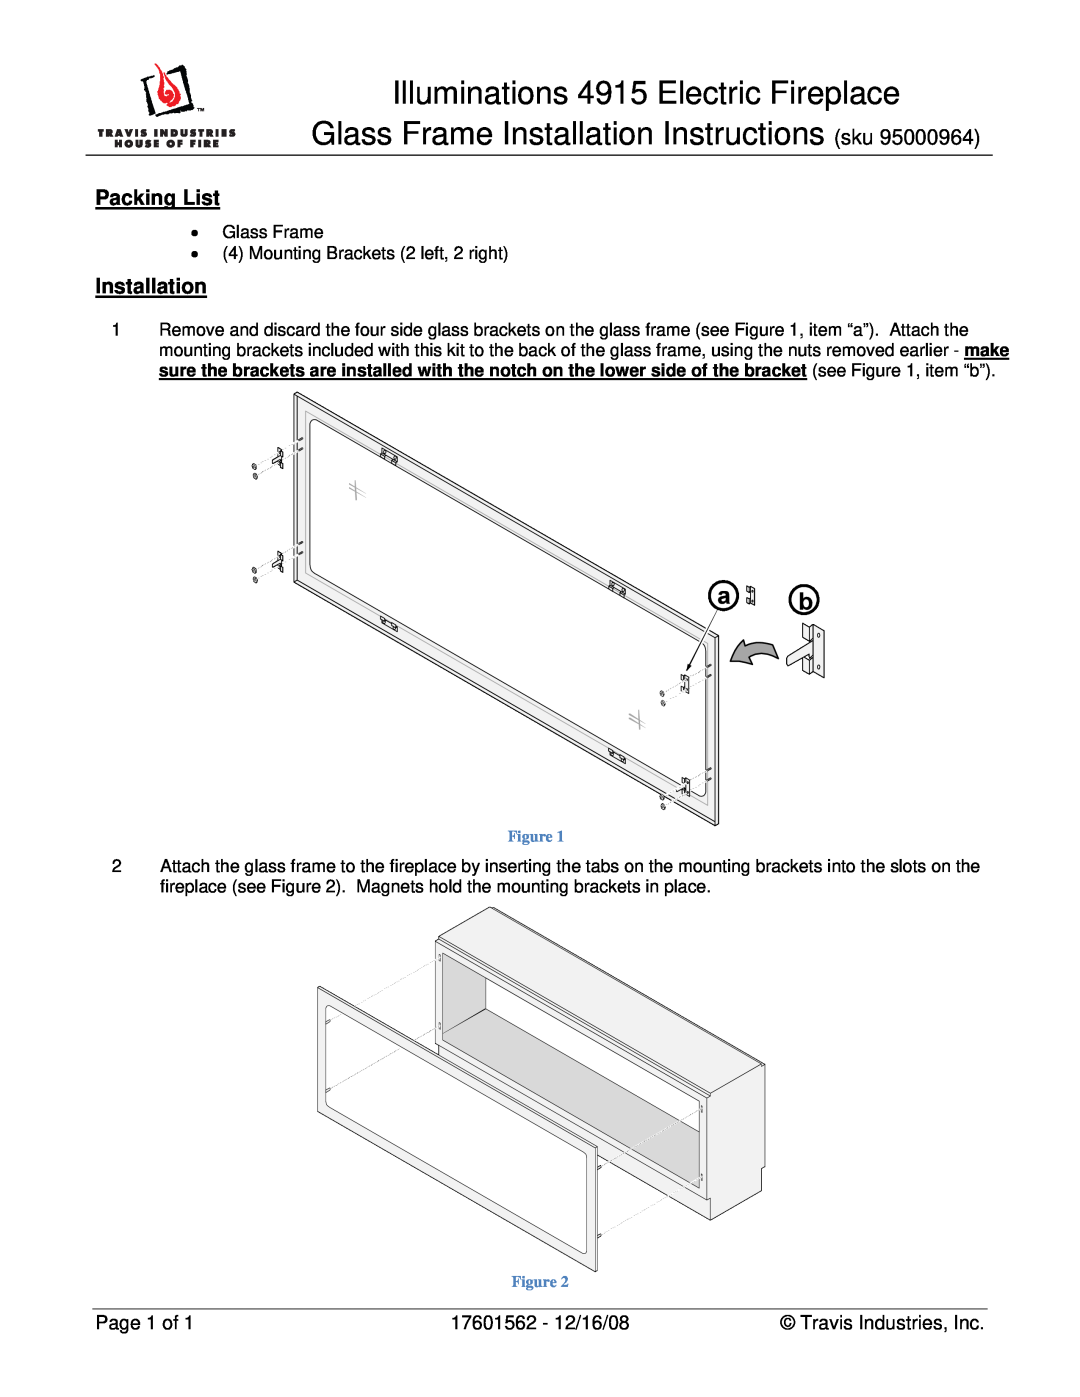 Avalon Stoves installation instructions Illuminations 4915 Electric Fireplace, Packing List, Installation, Page 1 of 